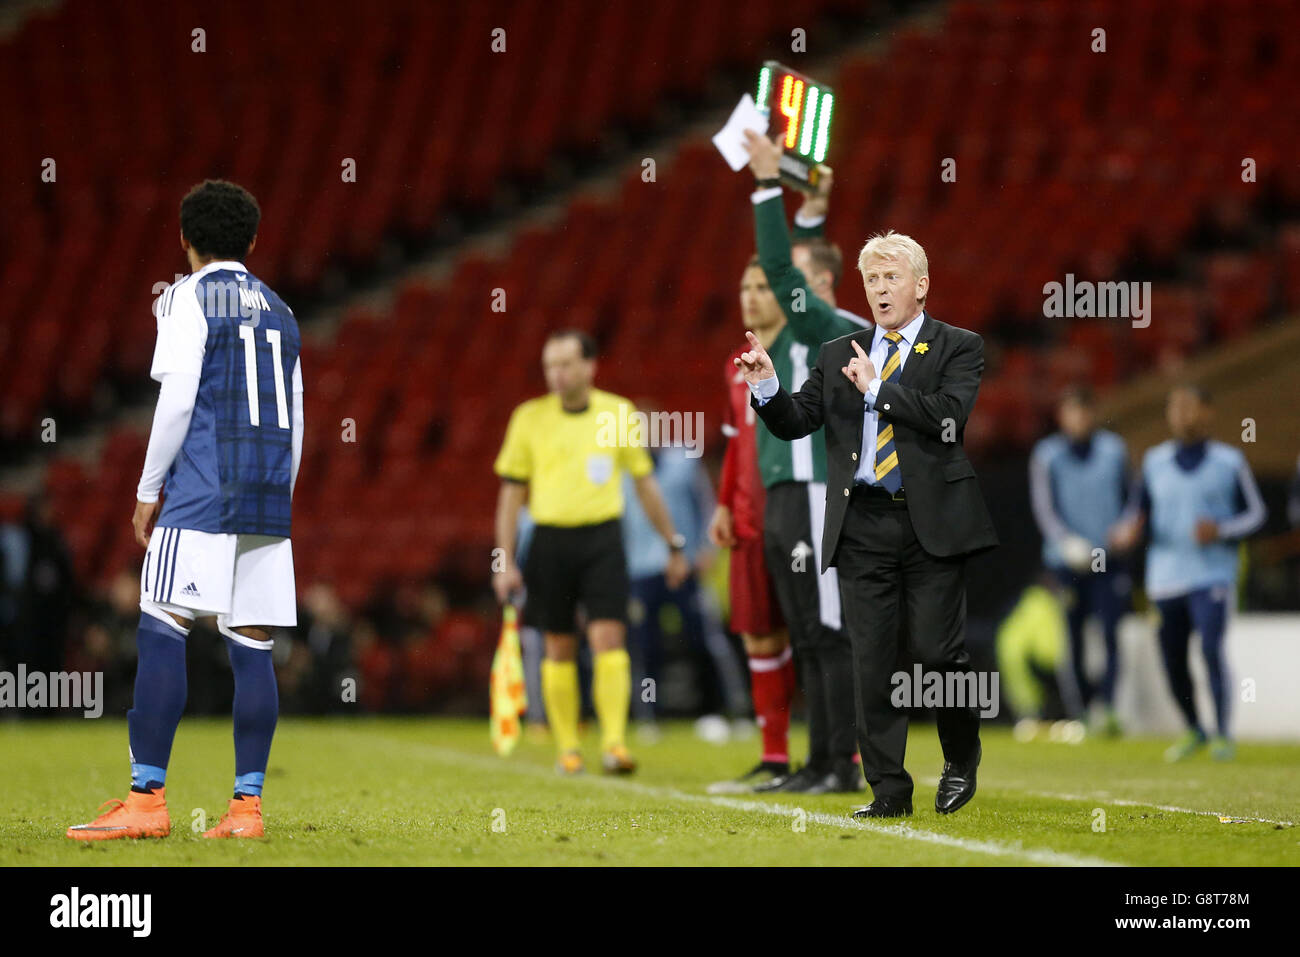 Scotland manager Gordon Strachan (right) speaks with Ikechi Anya (left) during a break in play in an International Friendly at Hampden Park, Glasgow. PRESS ASSOCIATION Photo. Picture date: Tuesday March 29, 2016. See PA story SOCCER Scotland. Photo credit should read: Danny Lawson/PA Wire. Stock Photo